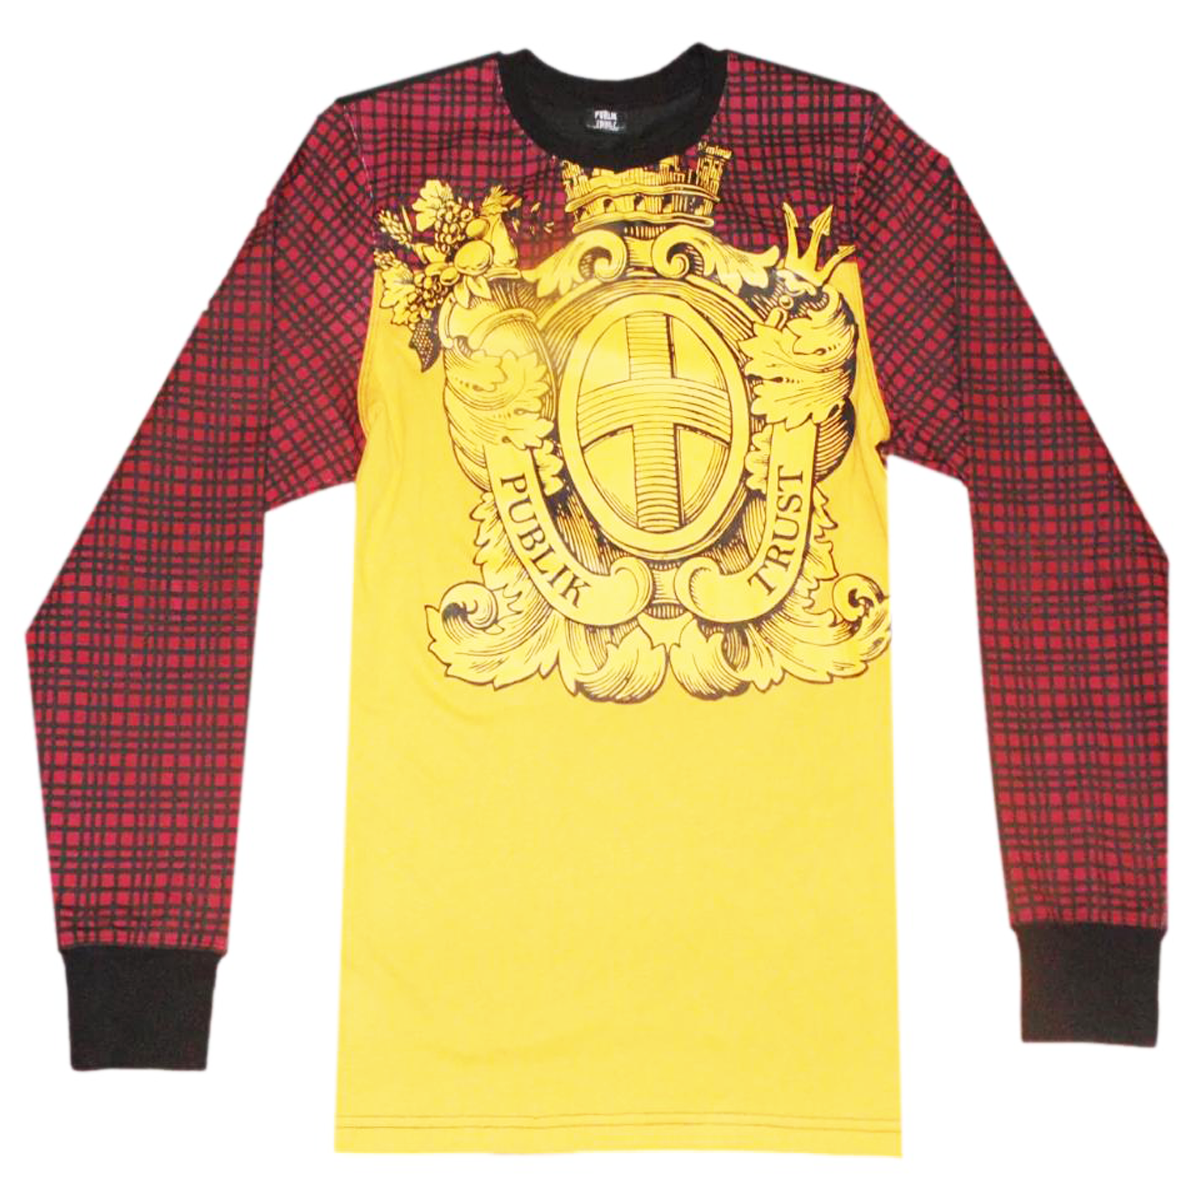 Publik Trust- Heir To The Throne L/S Tee (Burg/Old Gold)